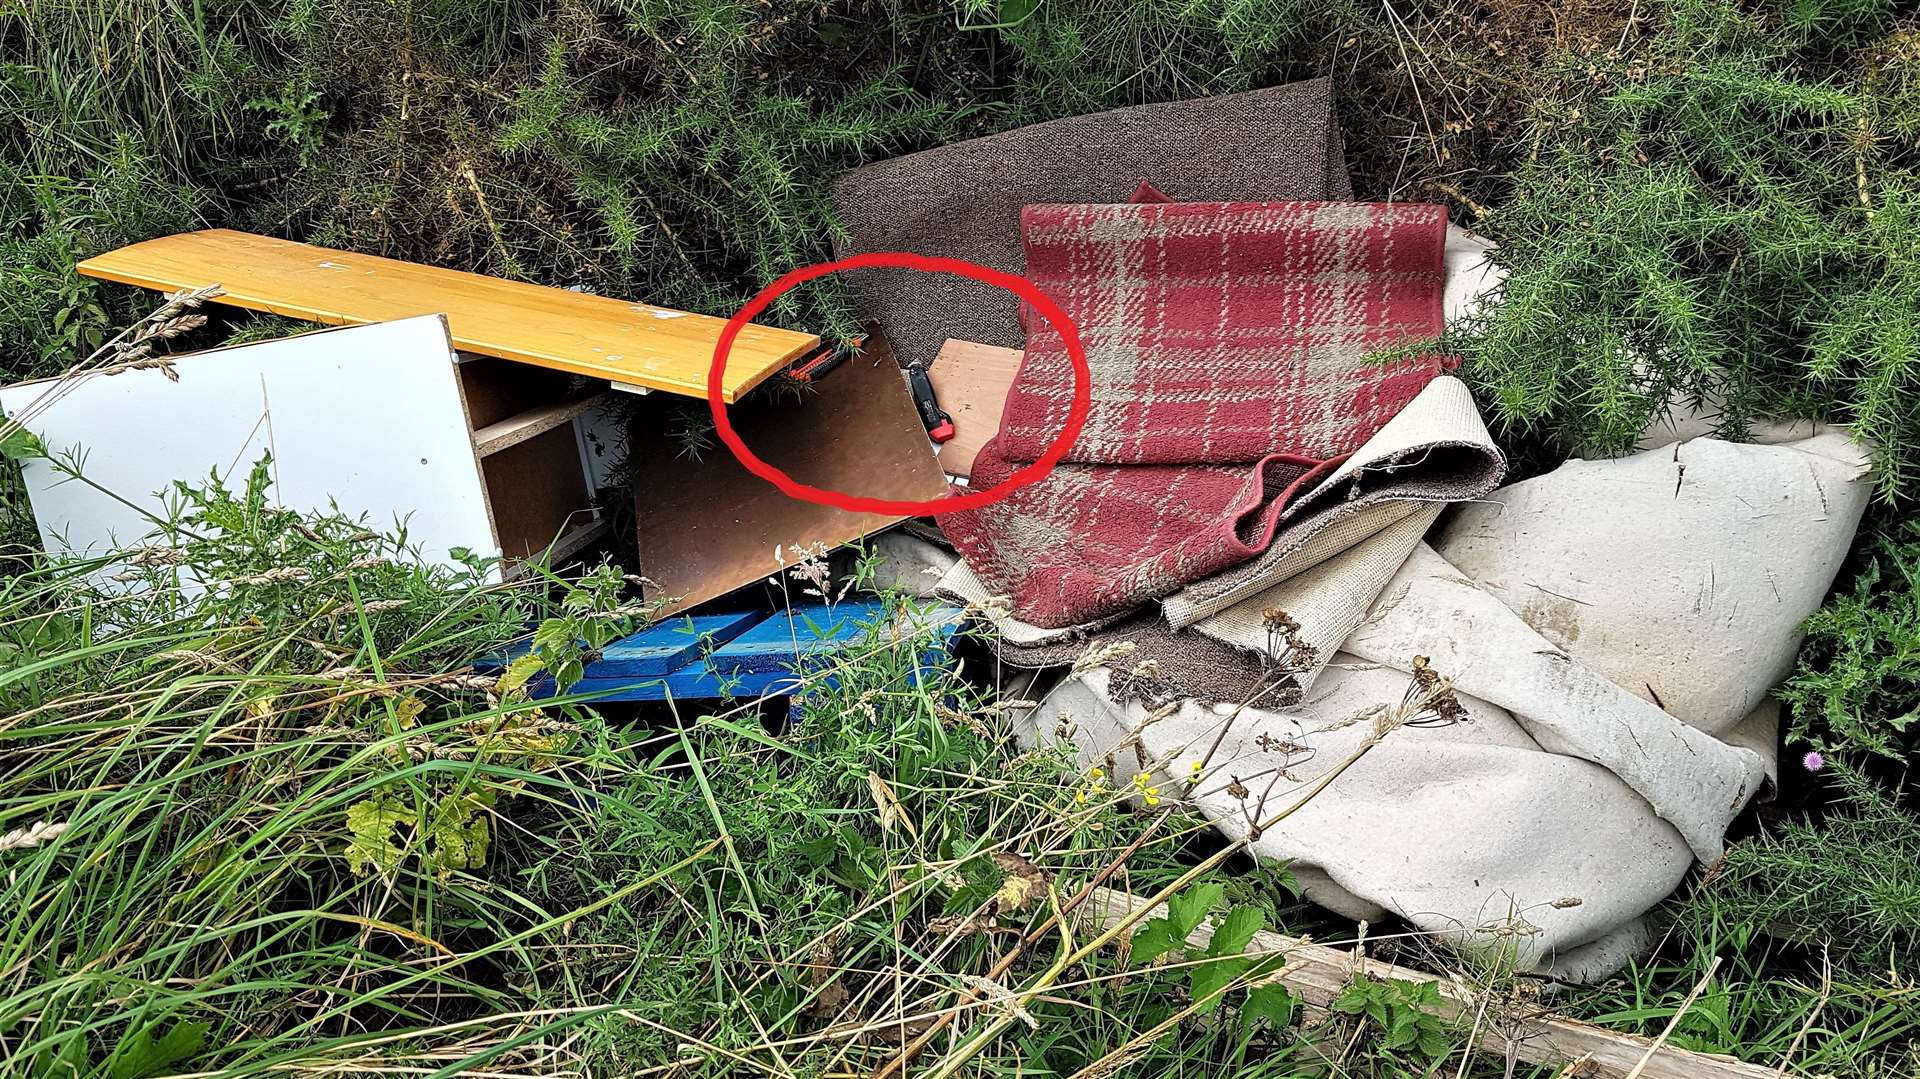 The circled area highlights two sharp knives in the pile of rubbish found near Thrumster. Picture: Willie Mackay